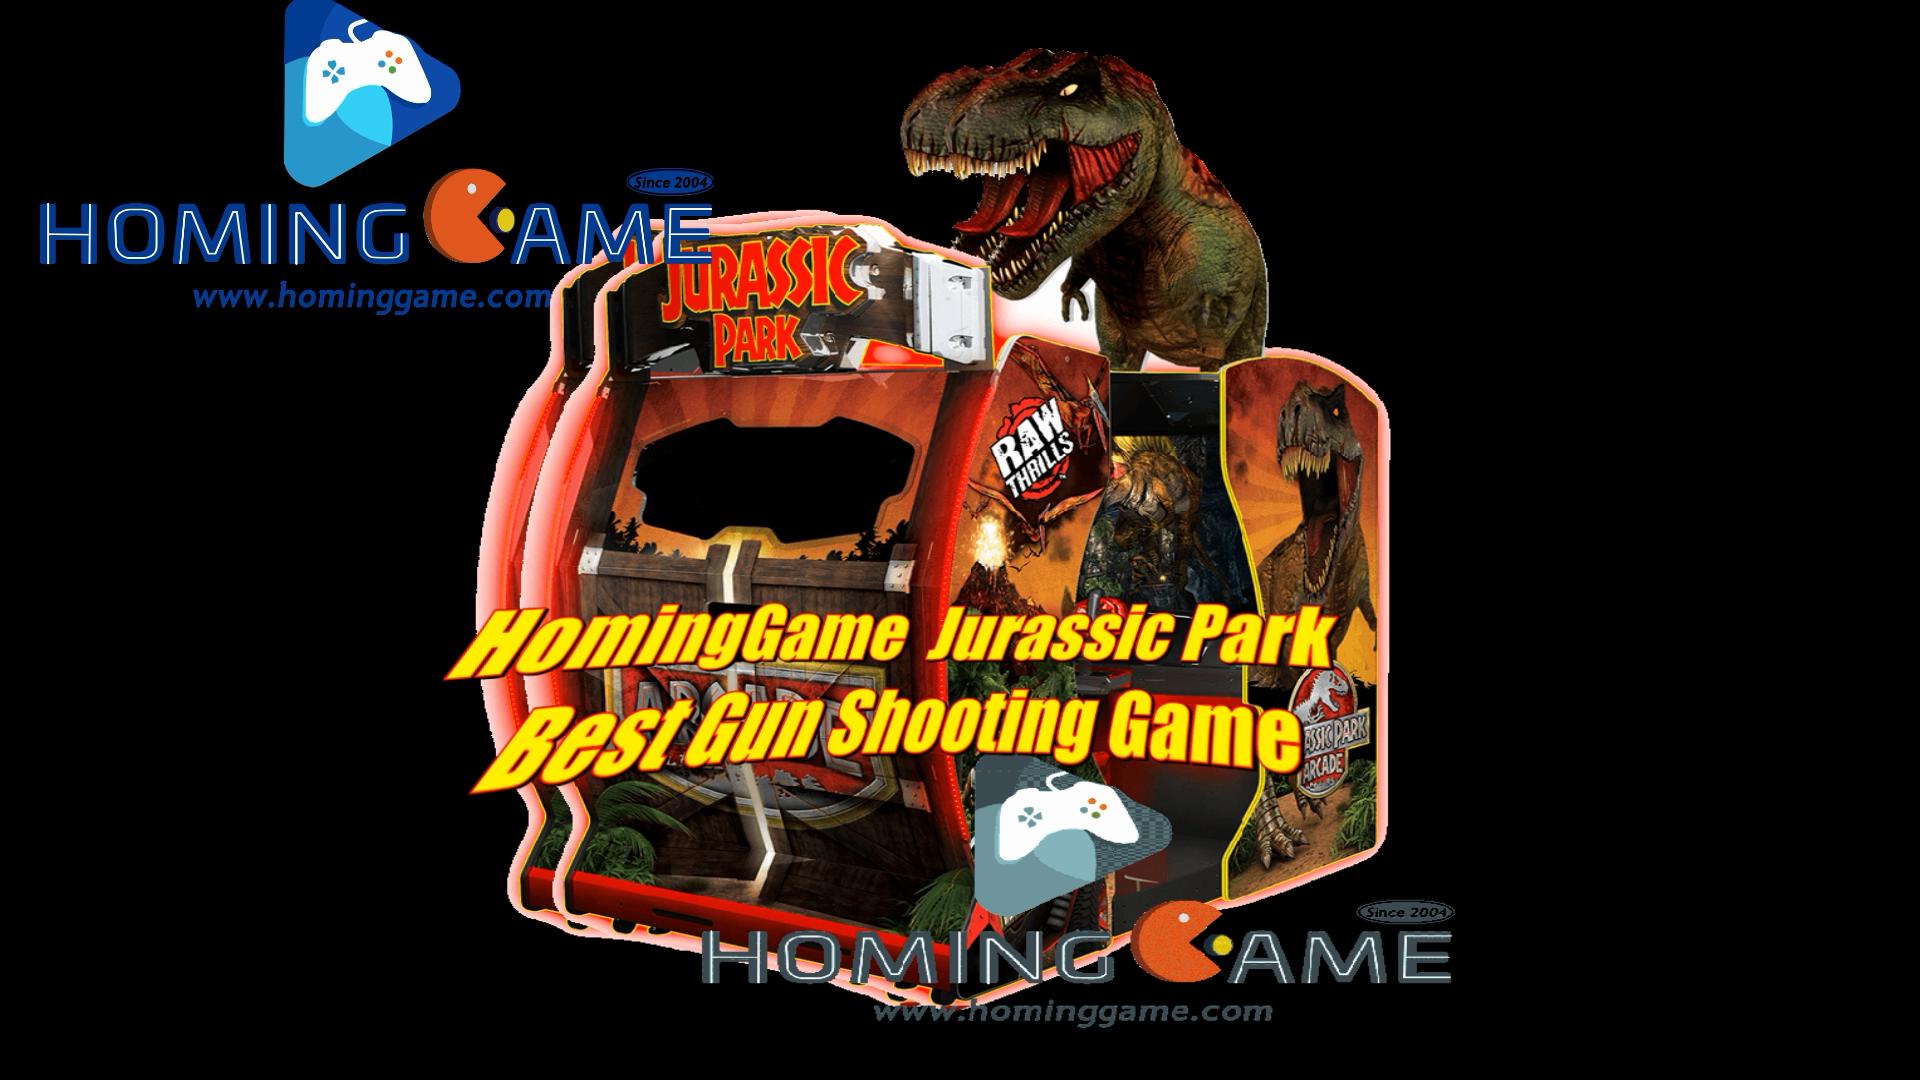 How to Play HomingGame Jurassic Park Arcade Video Game